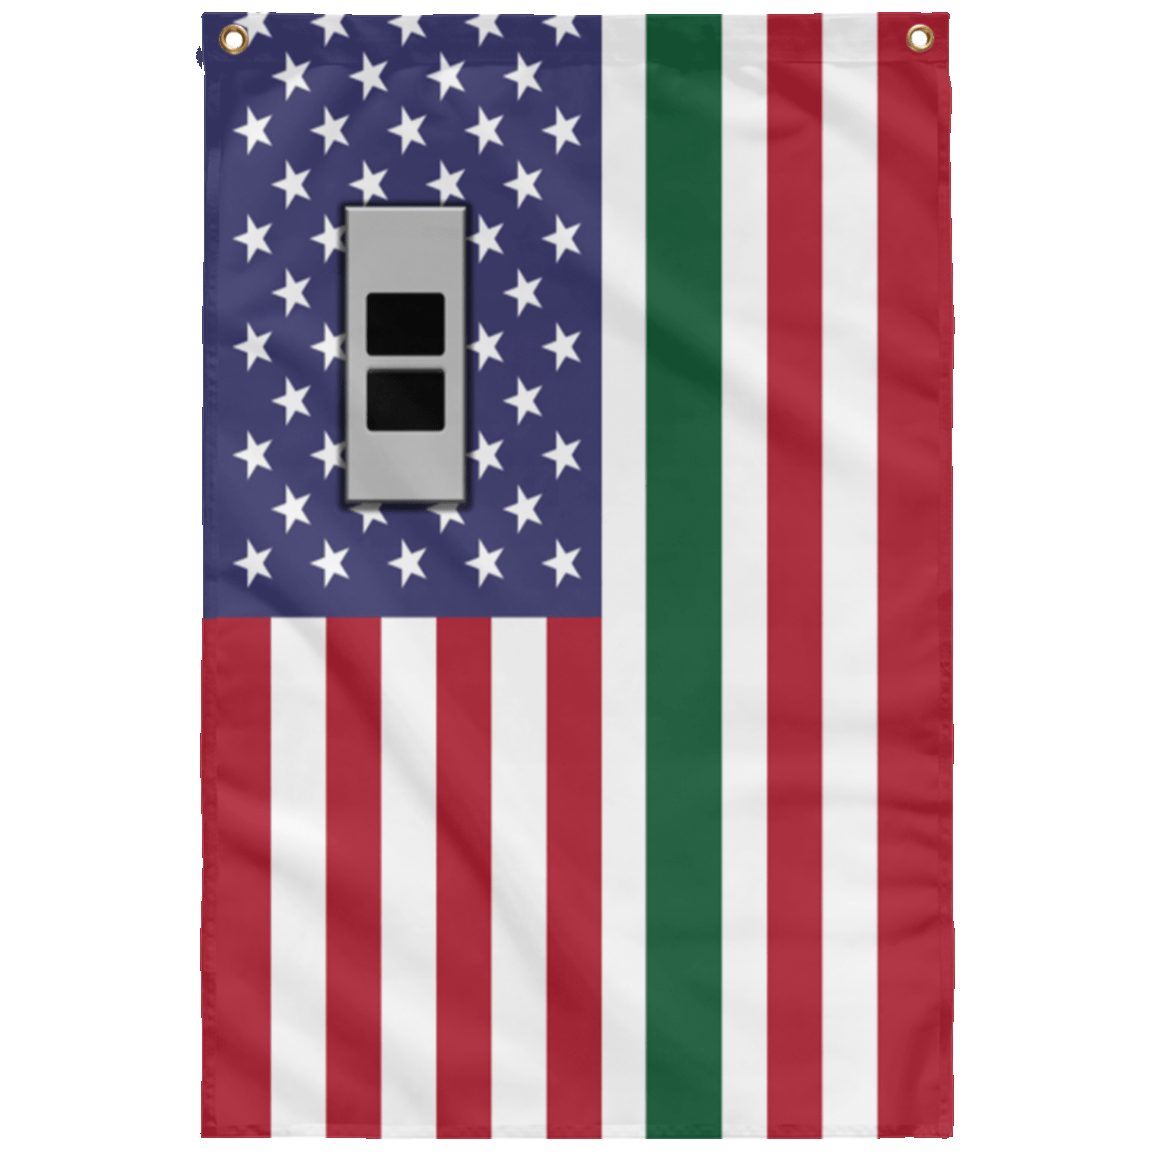 US Army W-2 Chief Warrant Officer 2 W2 CW2 Warrant Officer Wall Flag 3x5 ft Single Sided Print-WallFlag-Army-Ranks-Veterans Nation